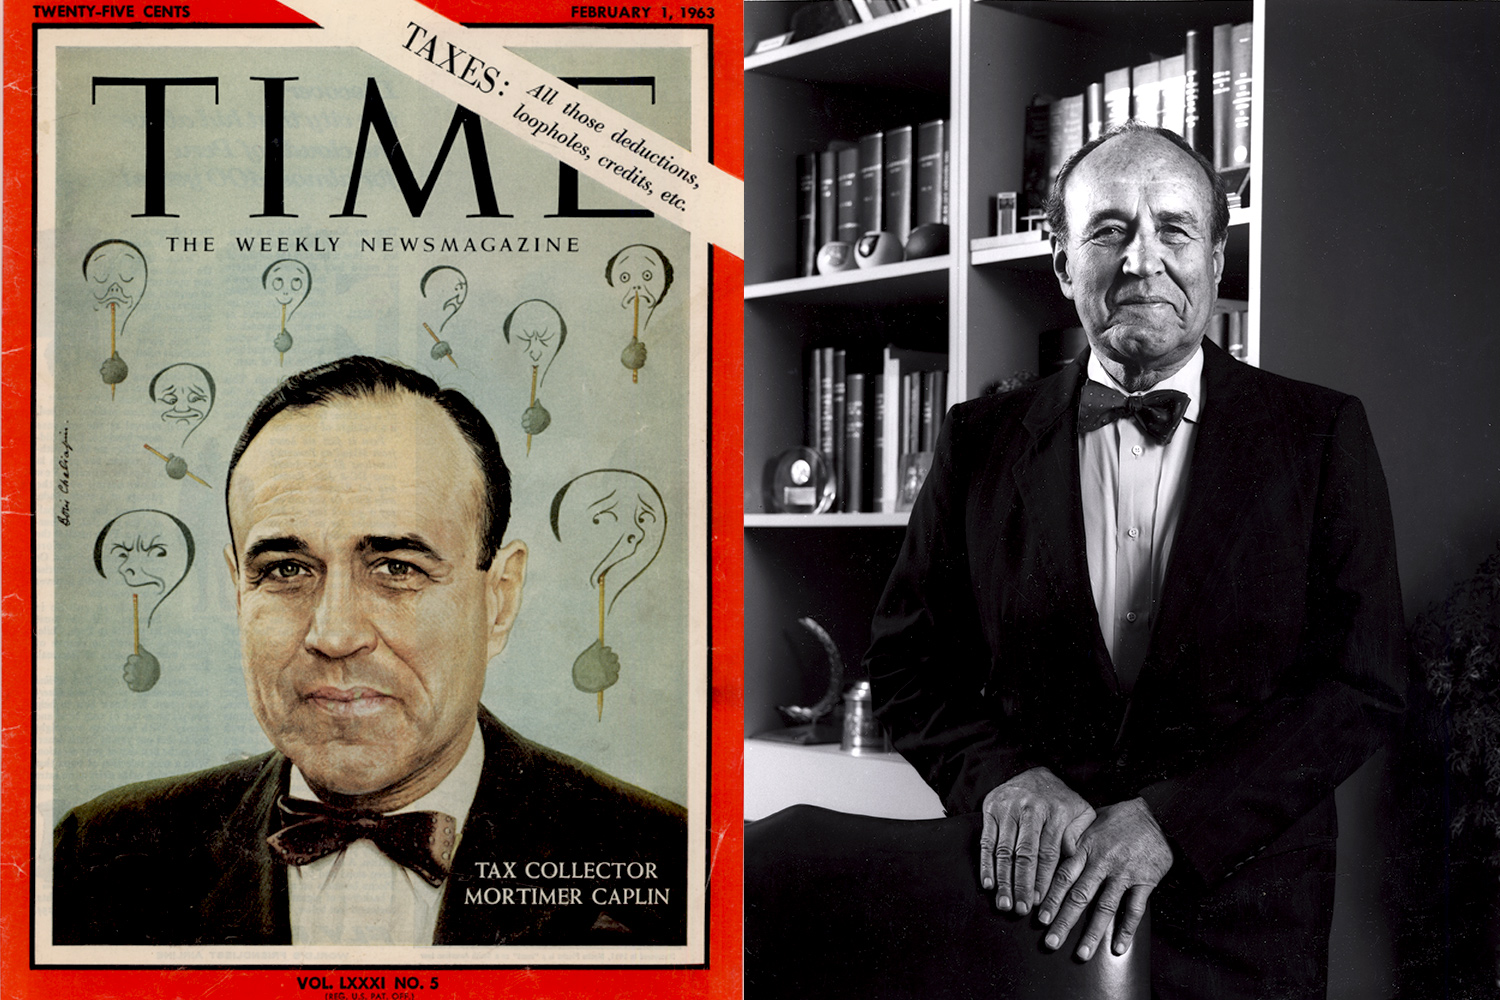 Left: Mortimer Caplin on the cover of Time Magazine.  Right: Mortimer Caplin standing with his hands on a chair smiling at the camera.  Black and white image